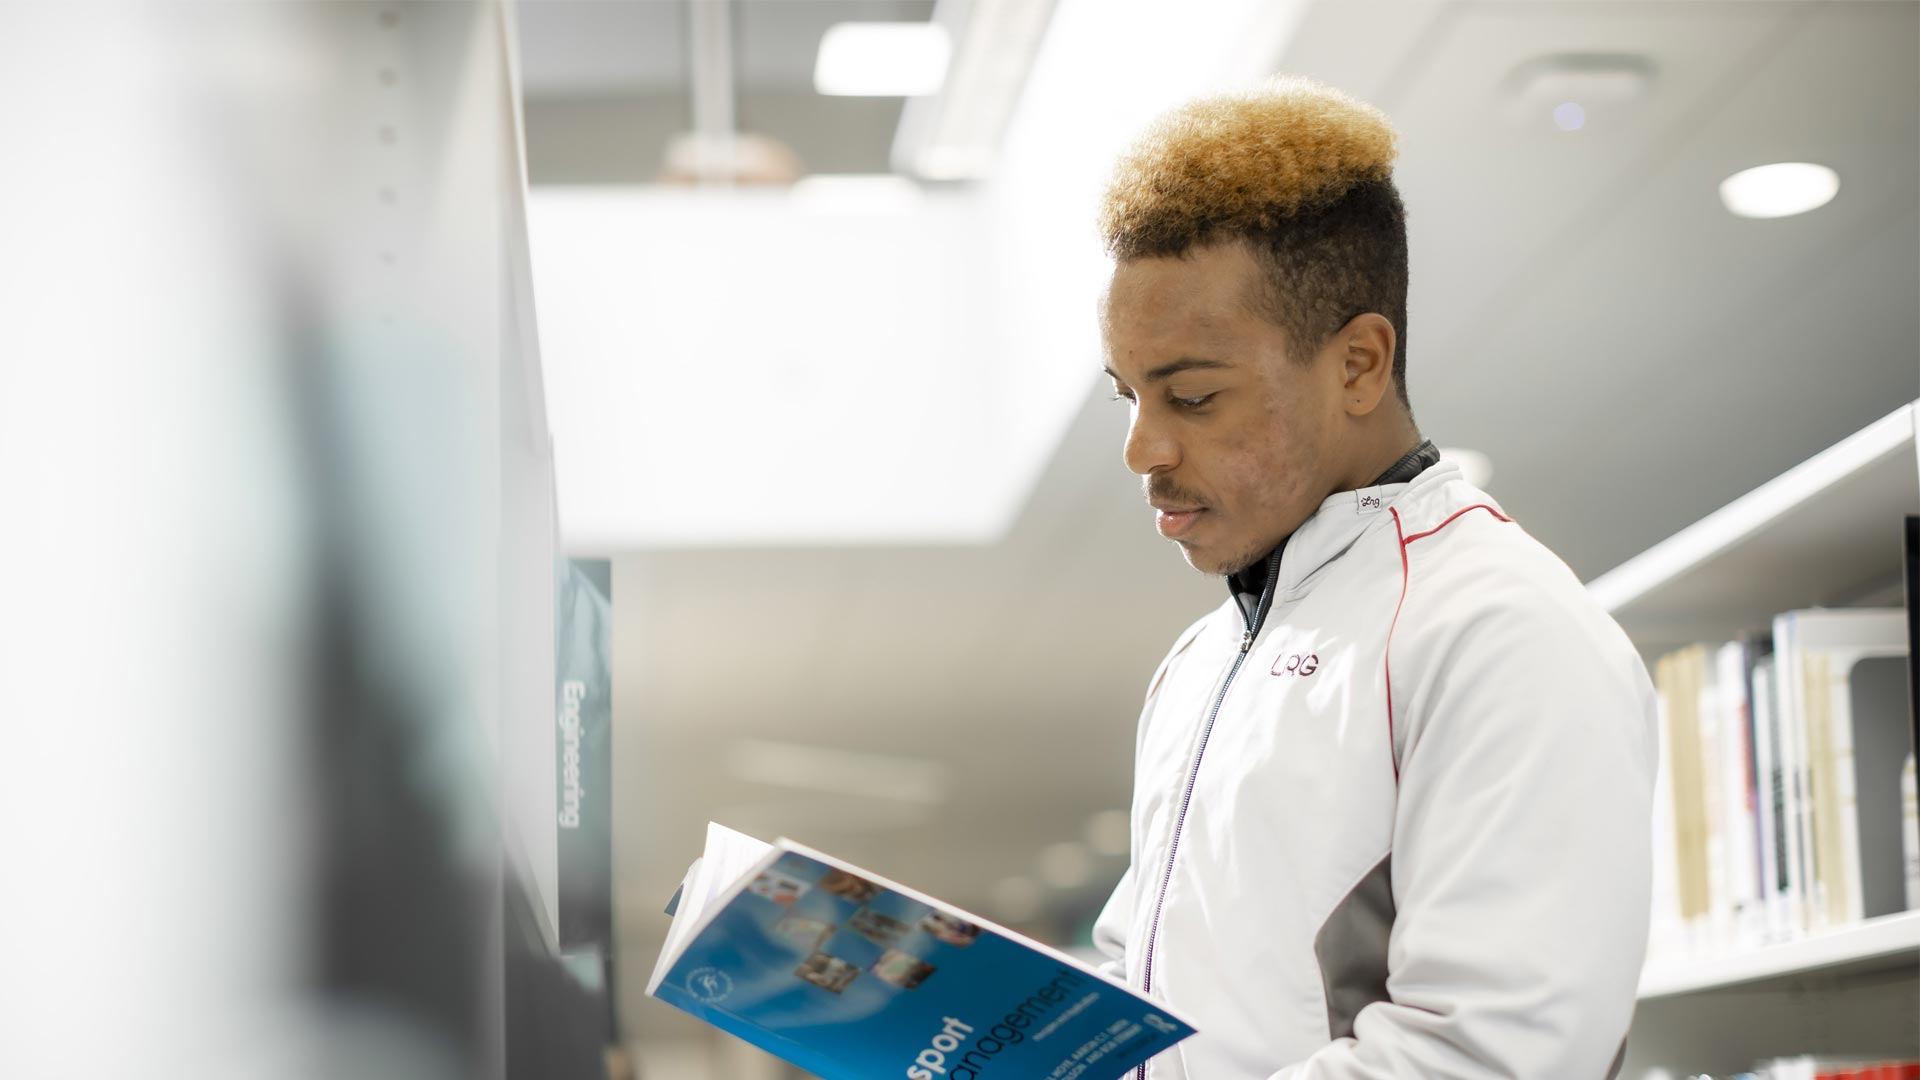 Sport student in sportswear reading a textbook in the library.